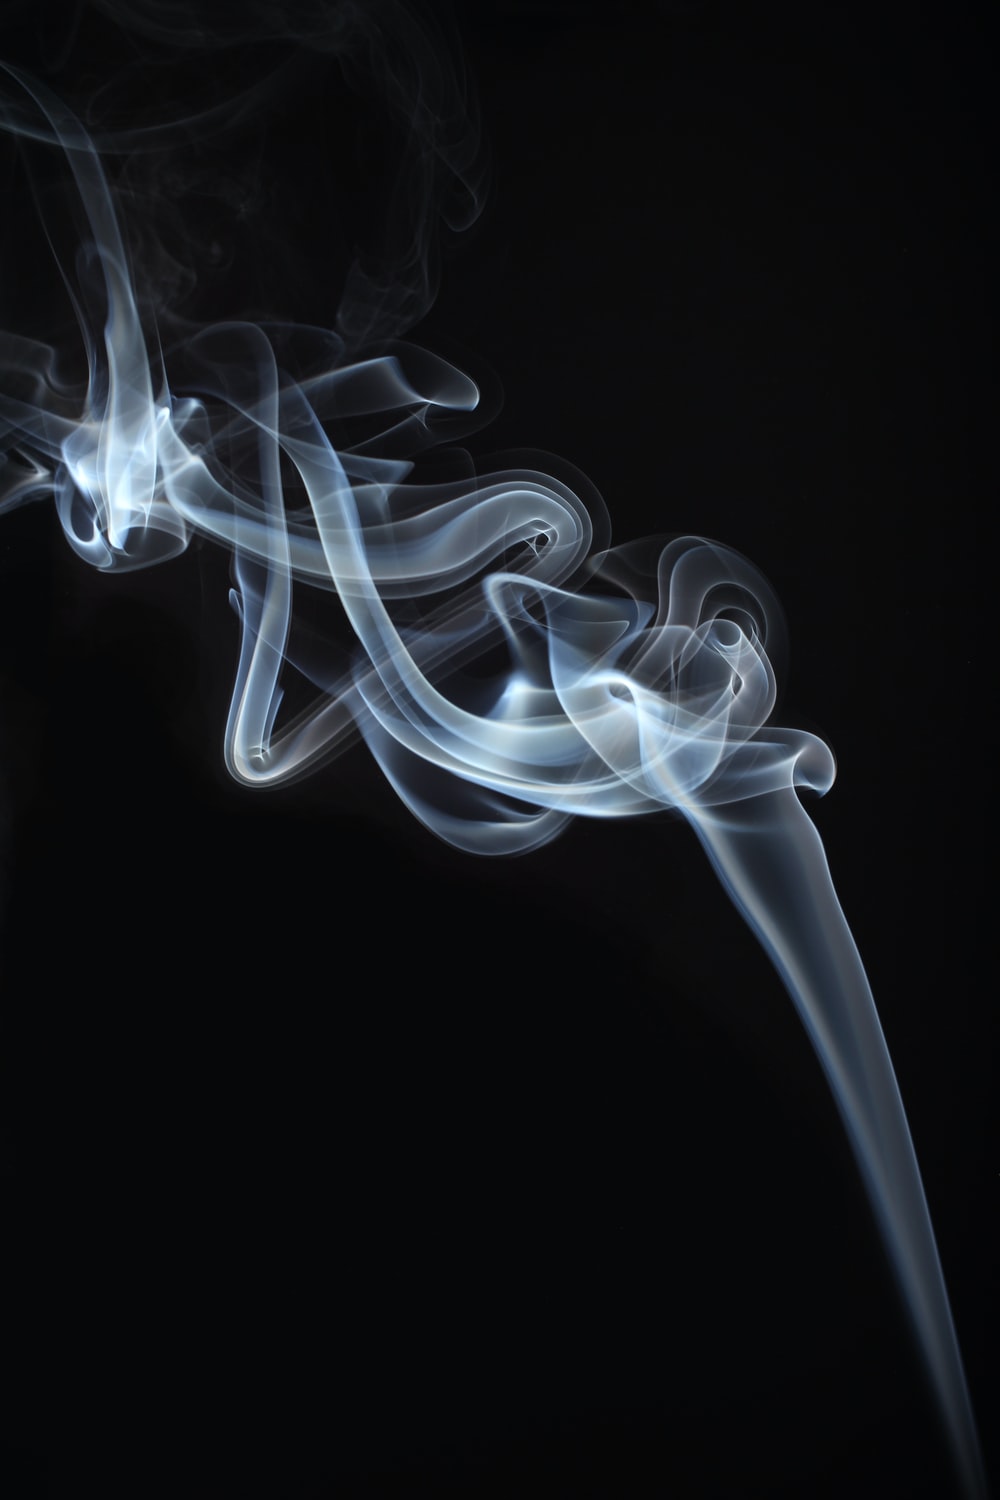 1K+ Black And White Smoke Picture. Download Free Image